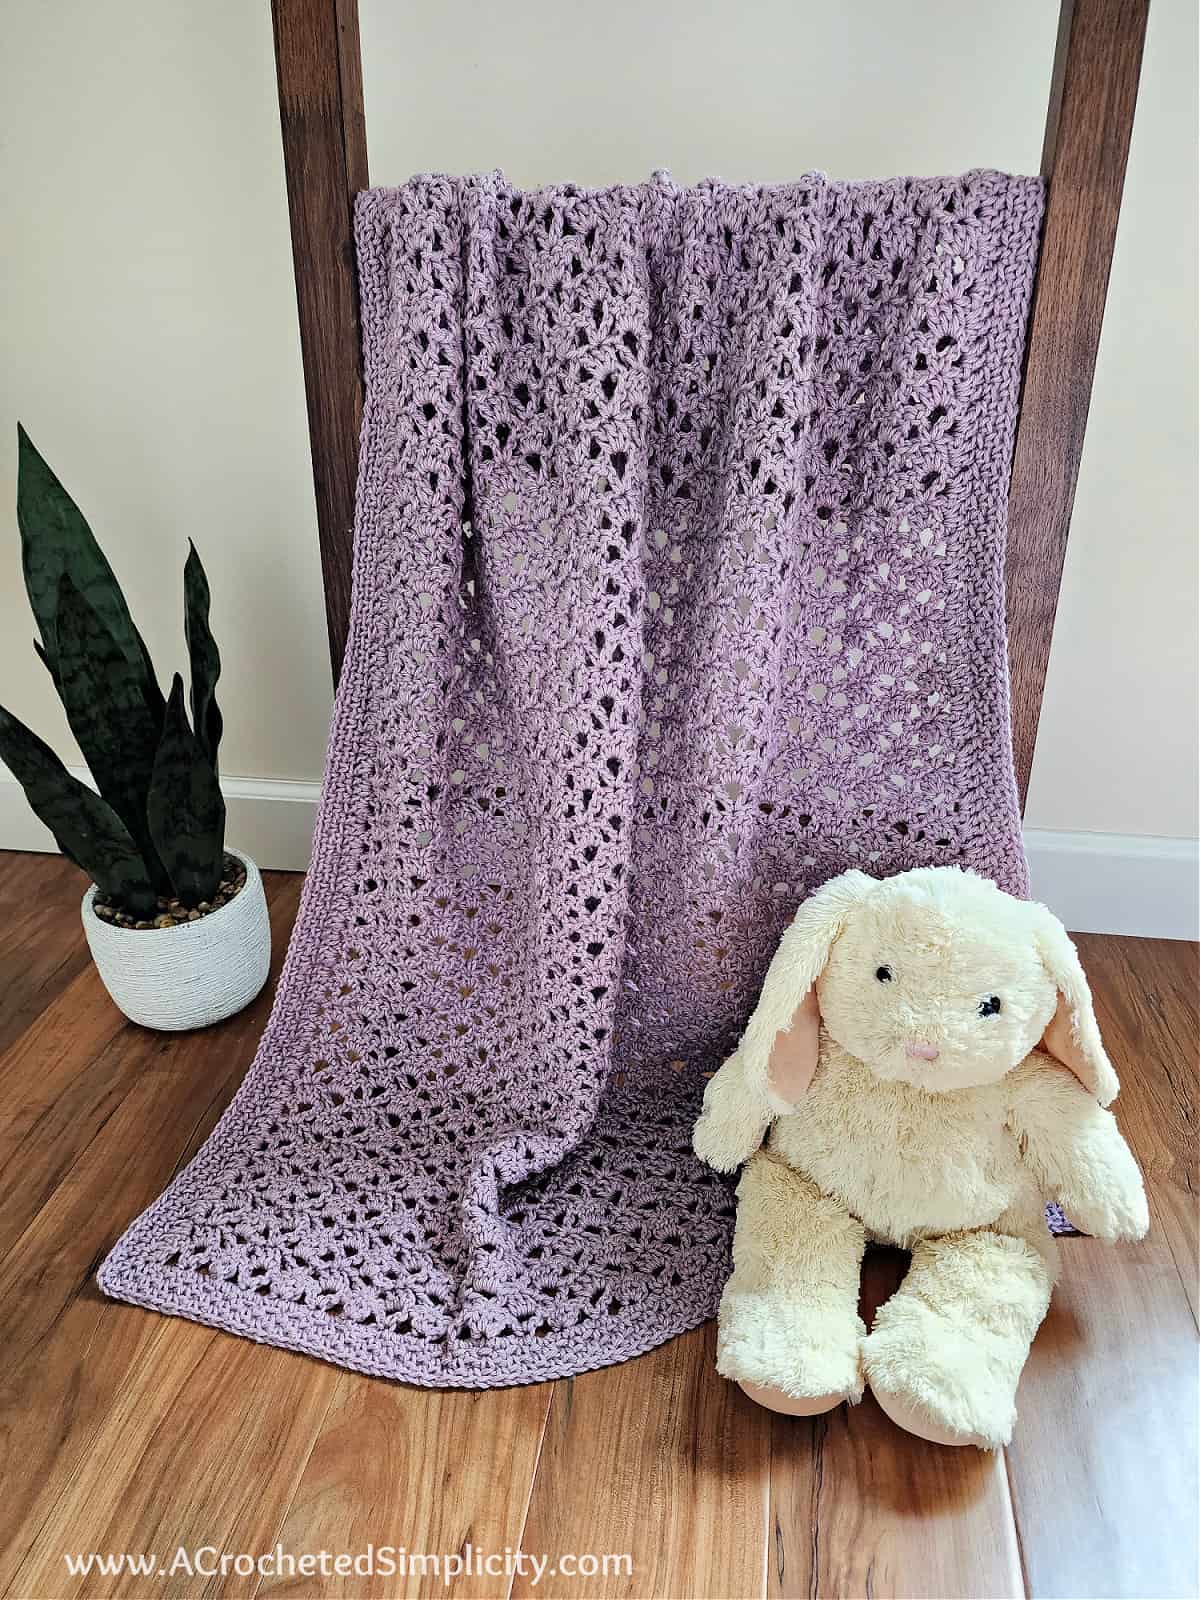 Lilac colored crochet lacy baby blanket with a cream colored stuffed bunny and plant